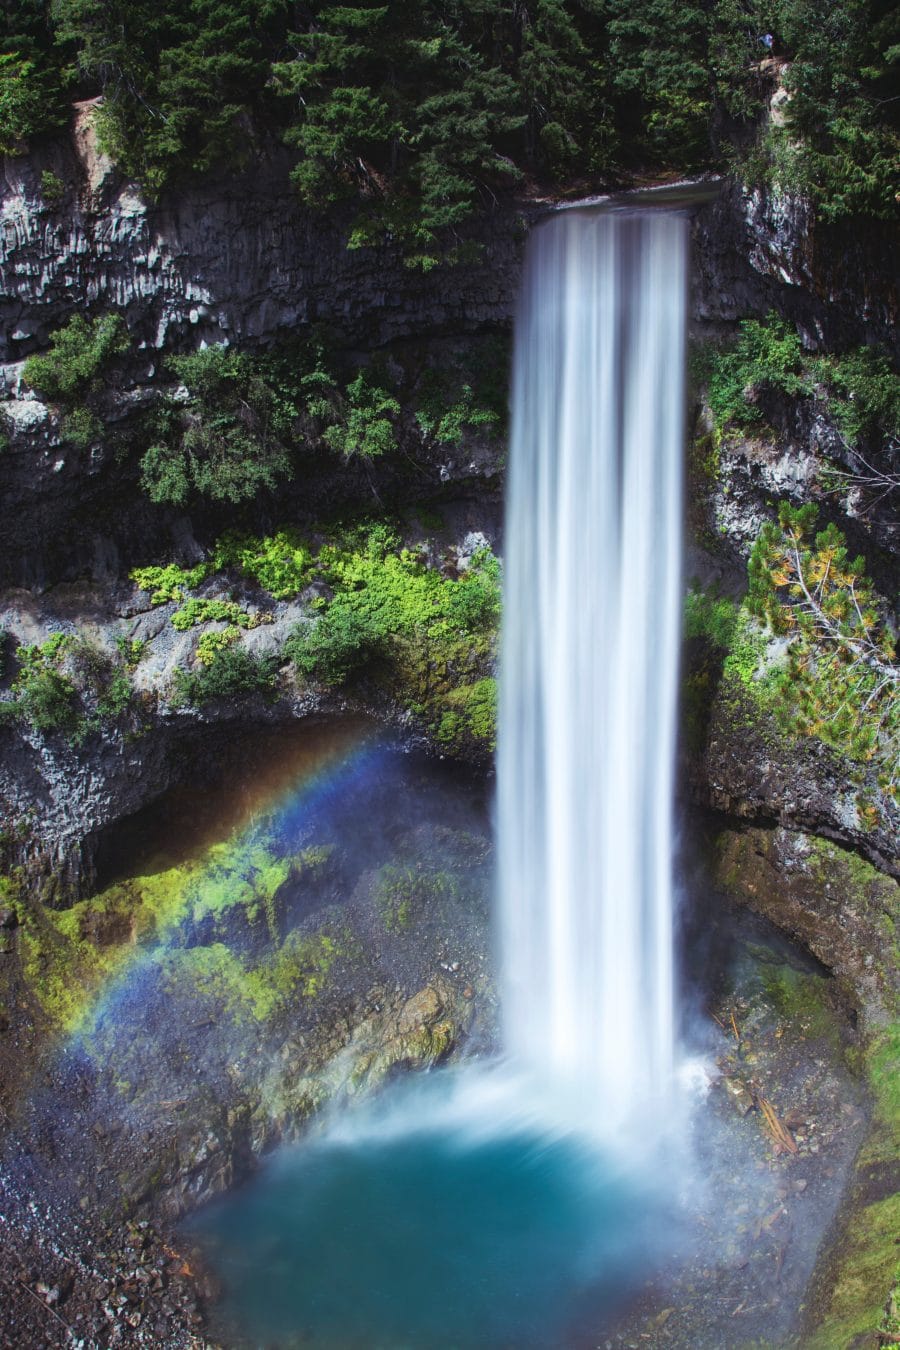 image example of a waterfall using a slow shutter speed